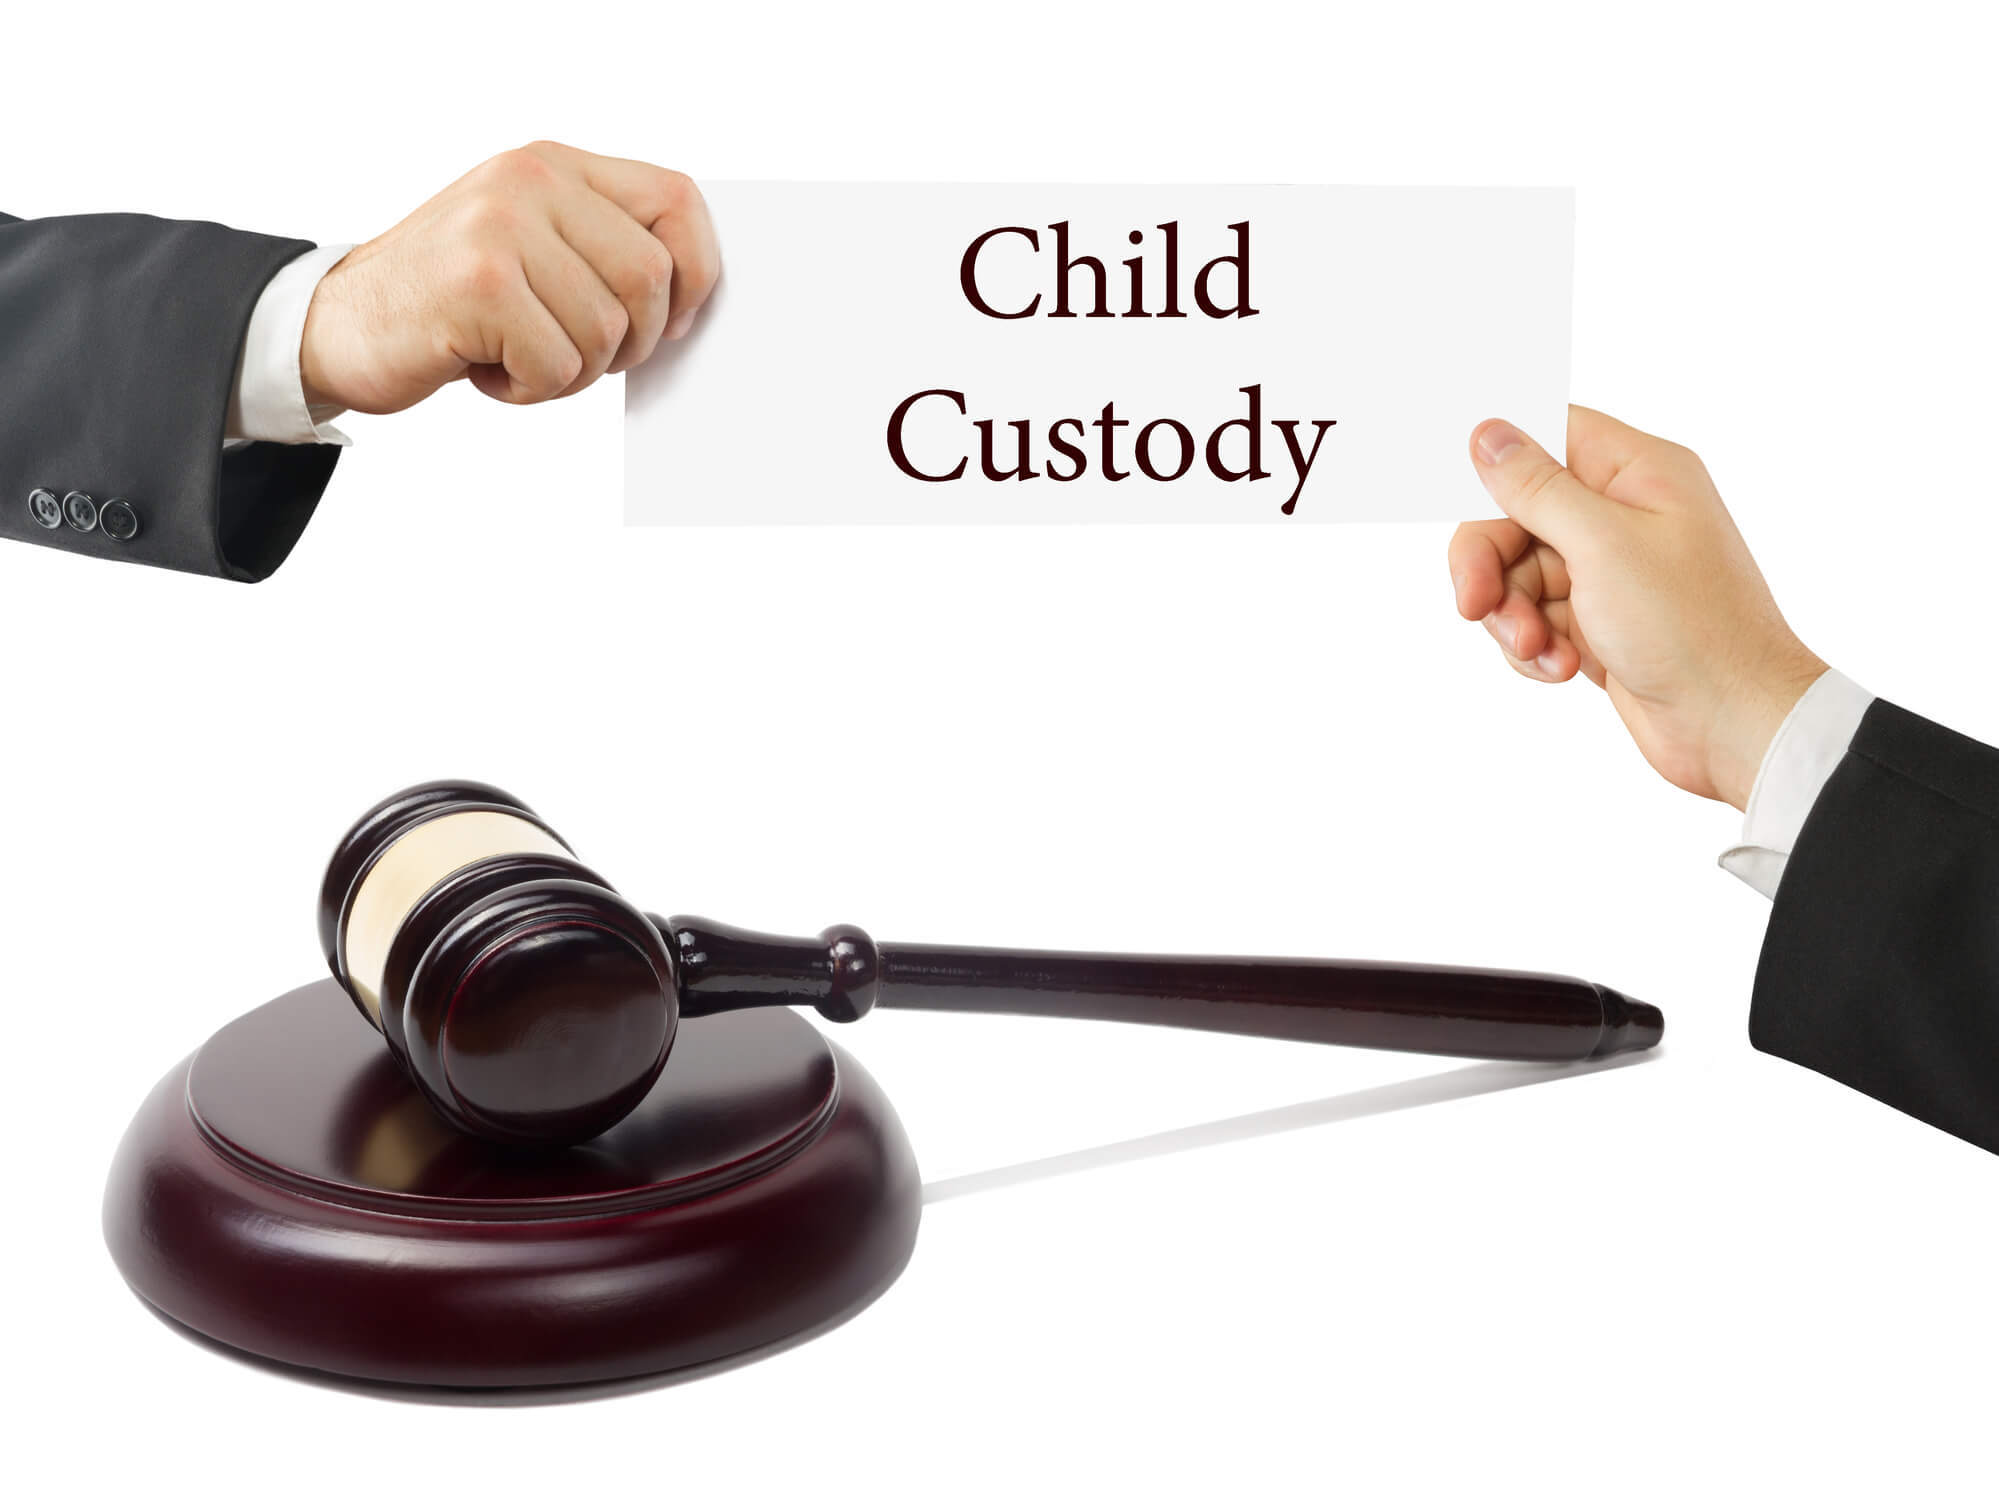 not-responding-to-child-custody-papers-huggins-law-office